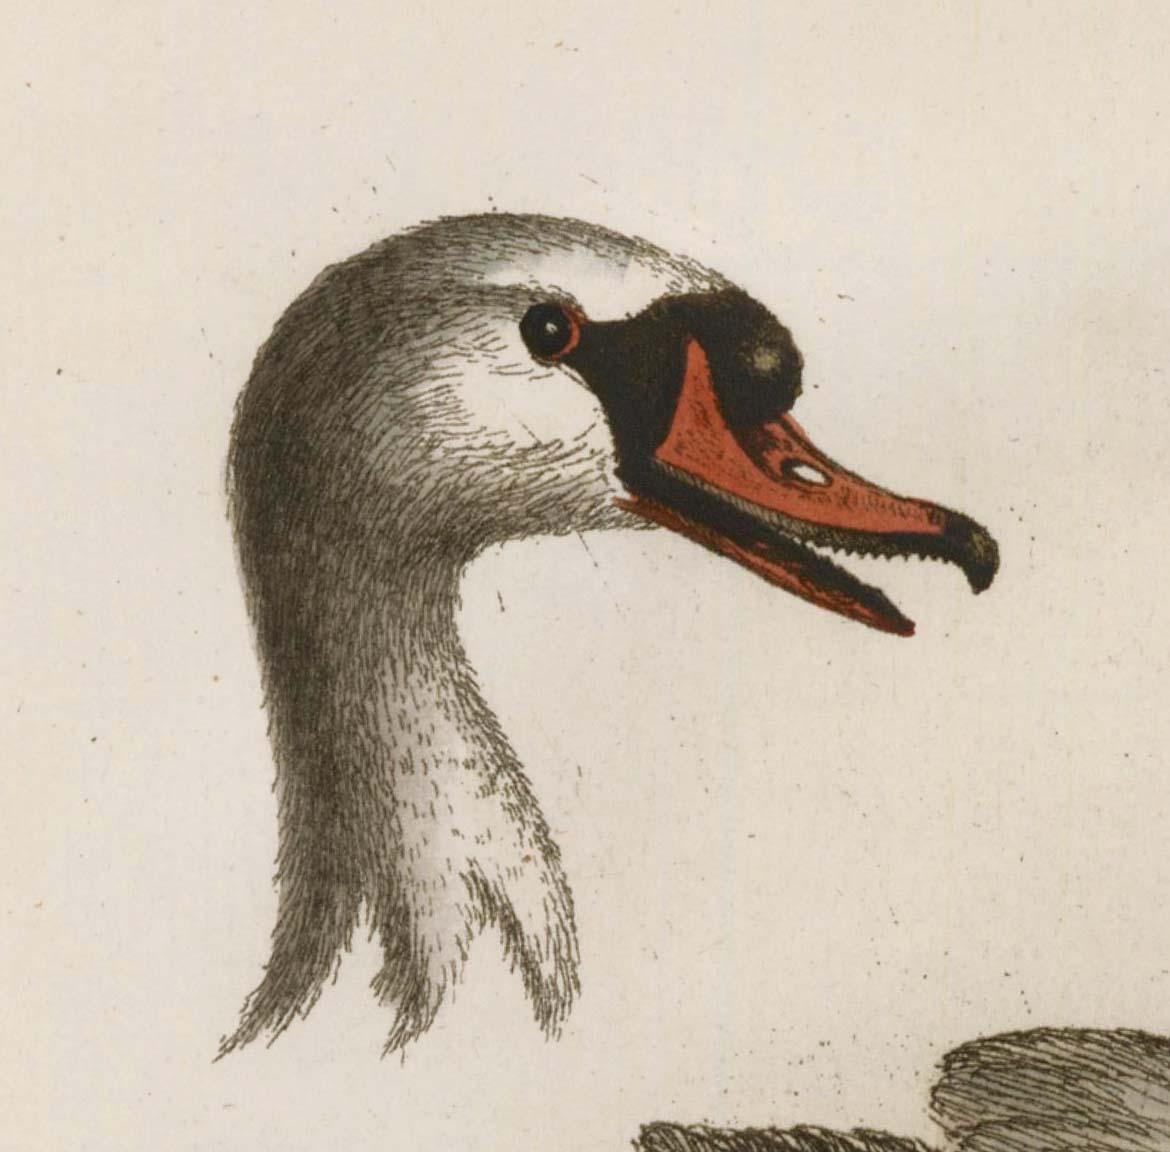  Hand-Colored Swan Engraving - Print by George Edwards